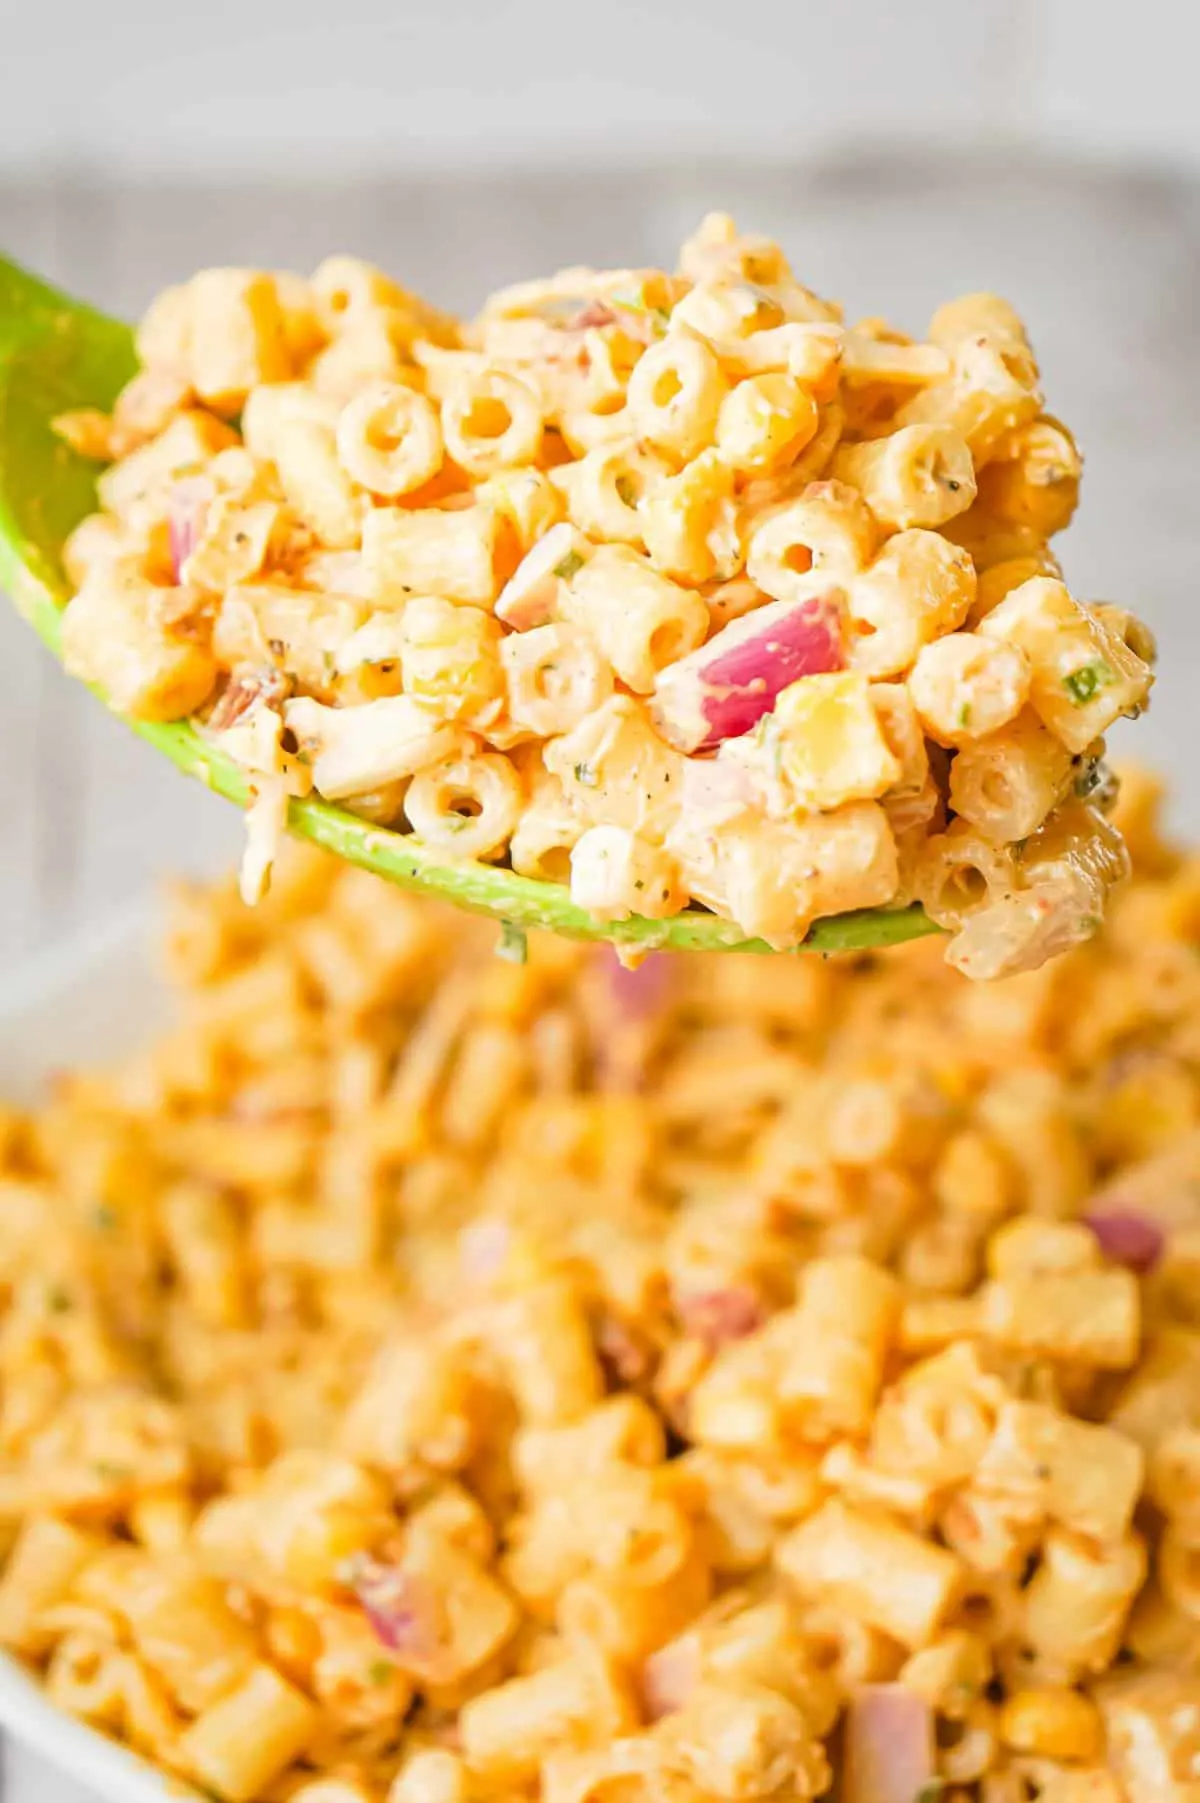 Cajun Macaroni Salad is a cold side dish recipe loaded with canned corn, crumbled bacon, diced red onions, shredded cheese and tossed in mayo and Cajun seasoning.